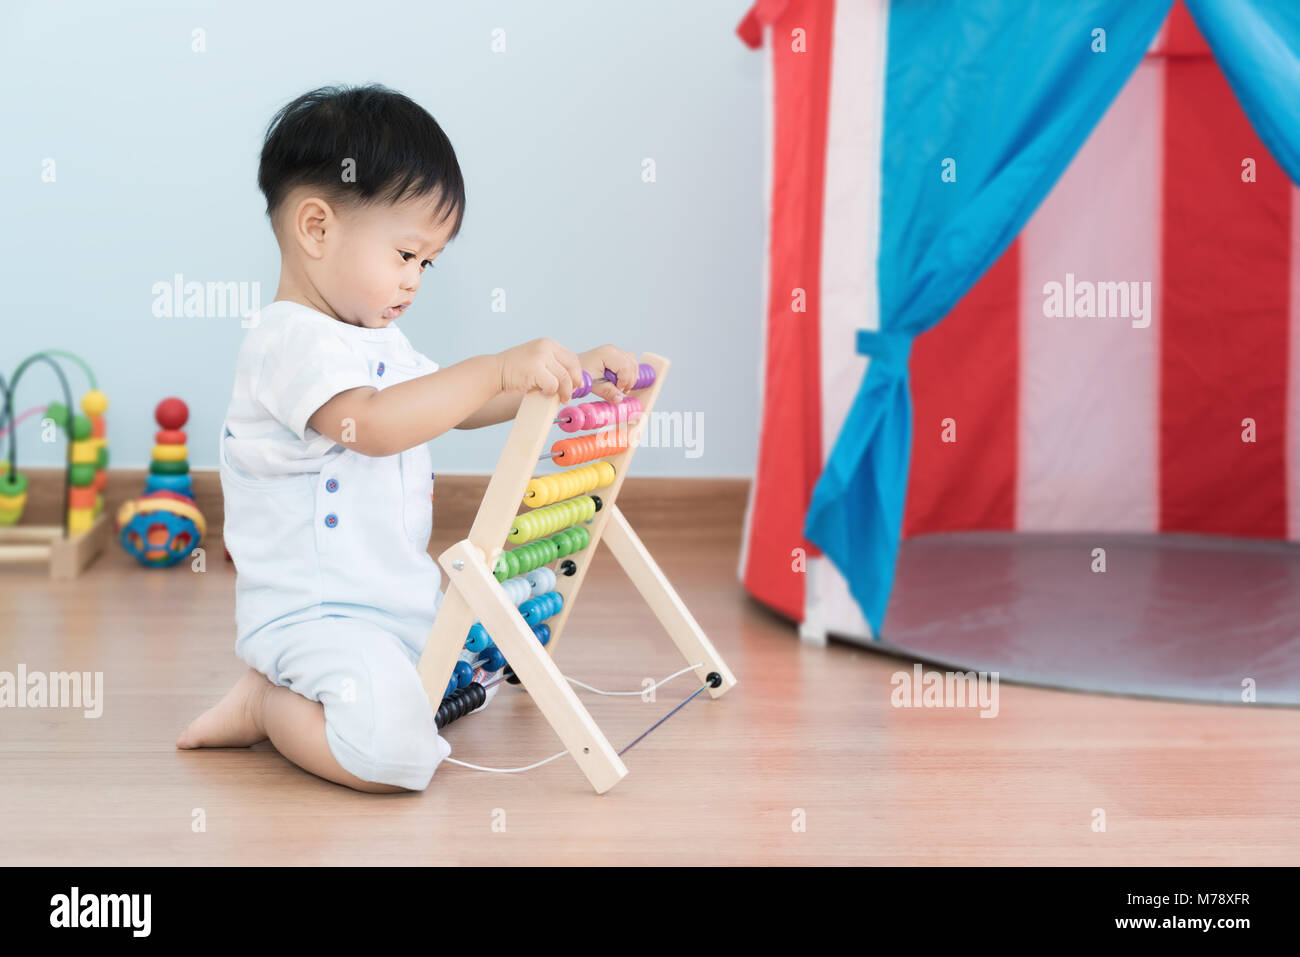 Asian baby boy learns to count. Cute child playing with abacus toy. Little boy having fun indoors at home. Educational concept for baby. Stock Photo